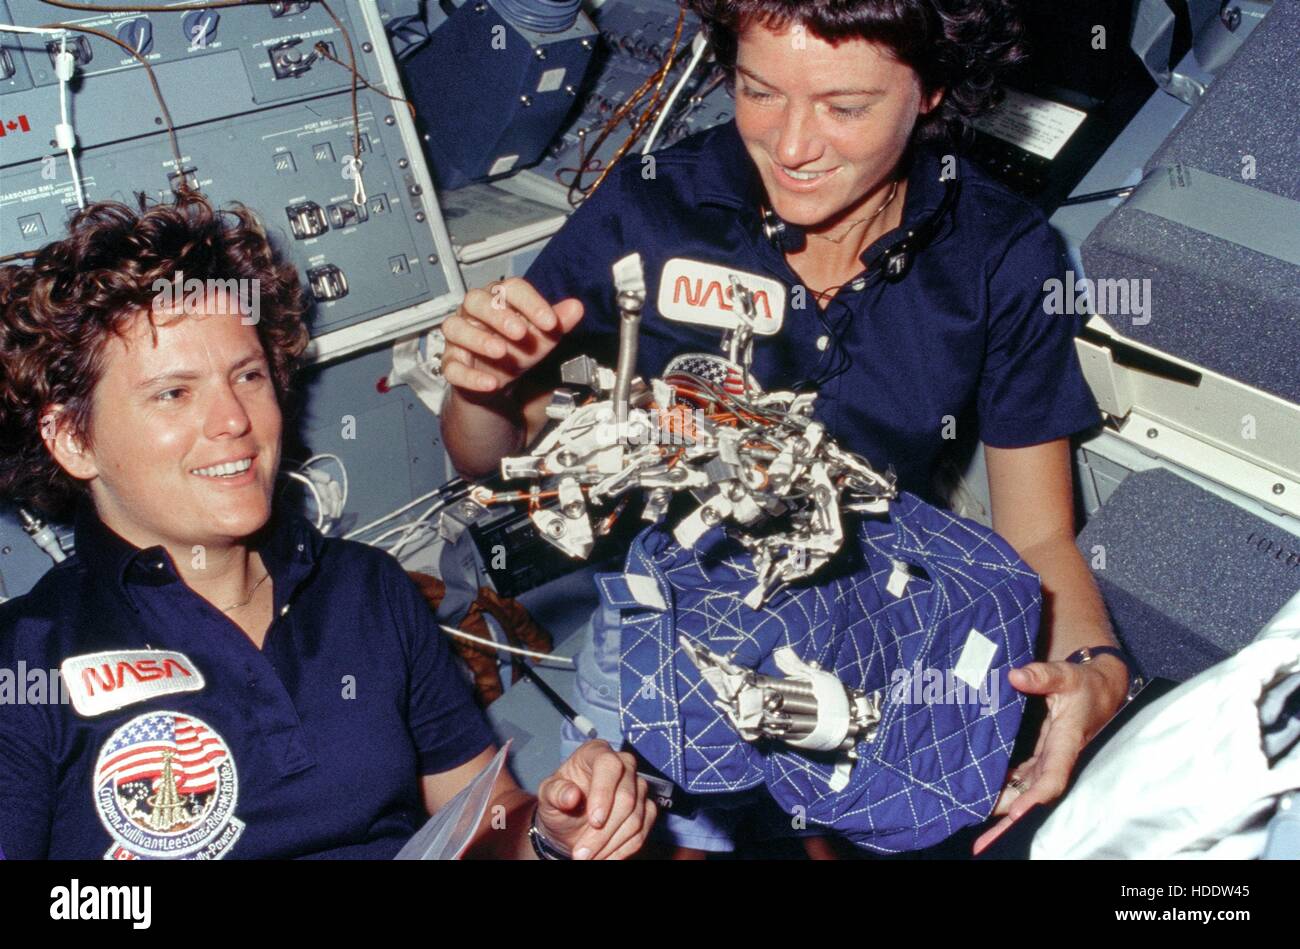 NASA STS-41G mission crew members astronauts Kathryn Sullivan (left) and Sally Ride show off their “bag of worms” sleep restraint system invention October 6, 1984 aboard the Space Shuttle Challenger in Earth orbit. The “bag” is a sleeping restraint and the “worms” consist of springs, clips, clamps, bungee cords, and Velcro strips to aid in restraint. Stock Photo